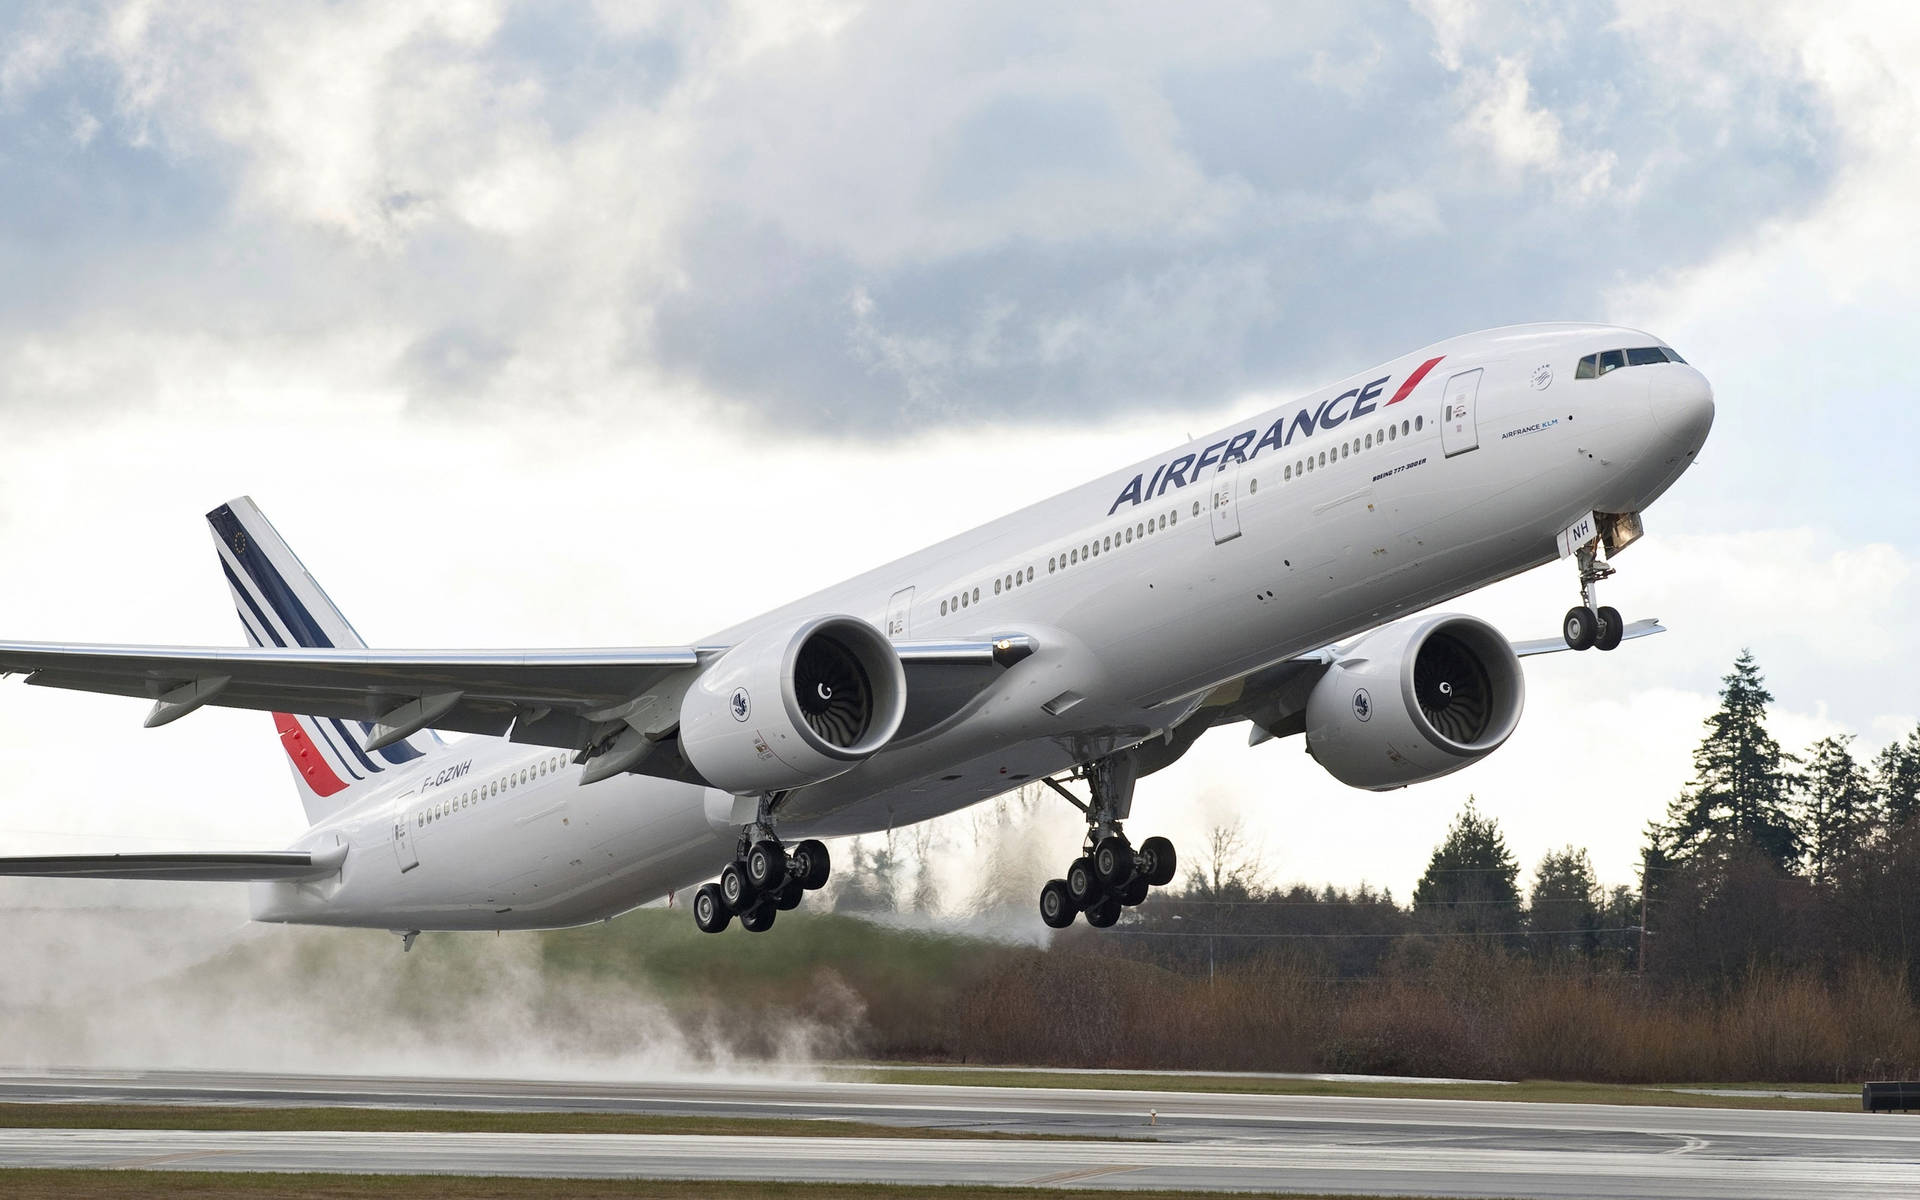 Air France Boeing 777 Plane Flying From Runway Wallpaper